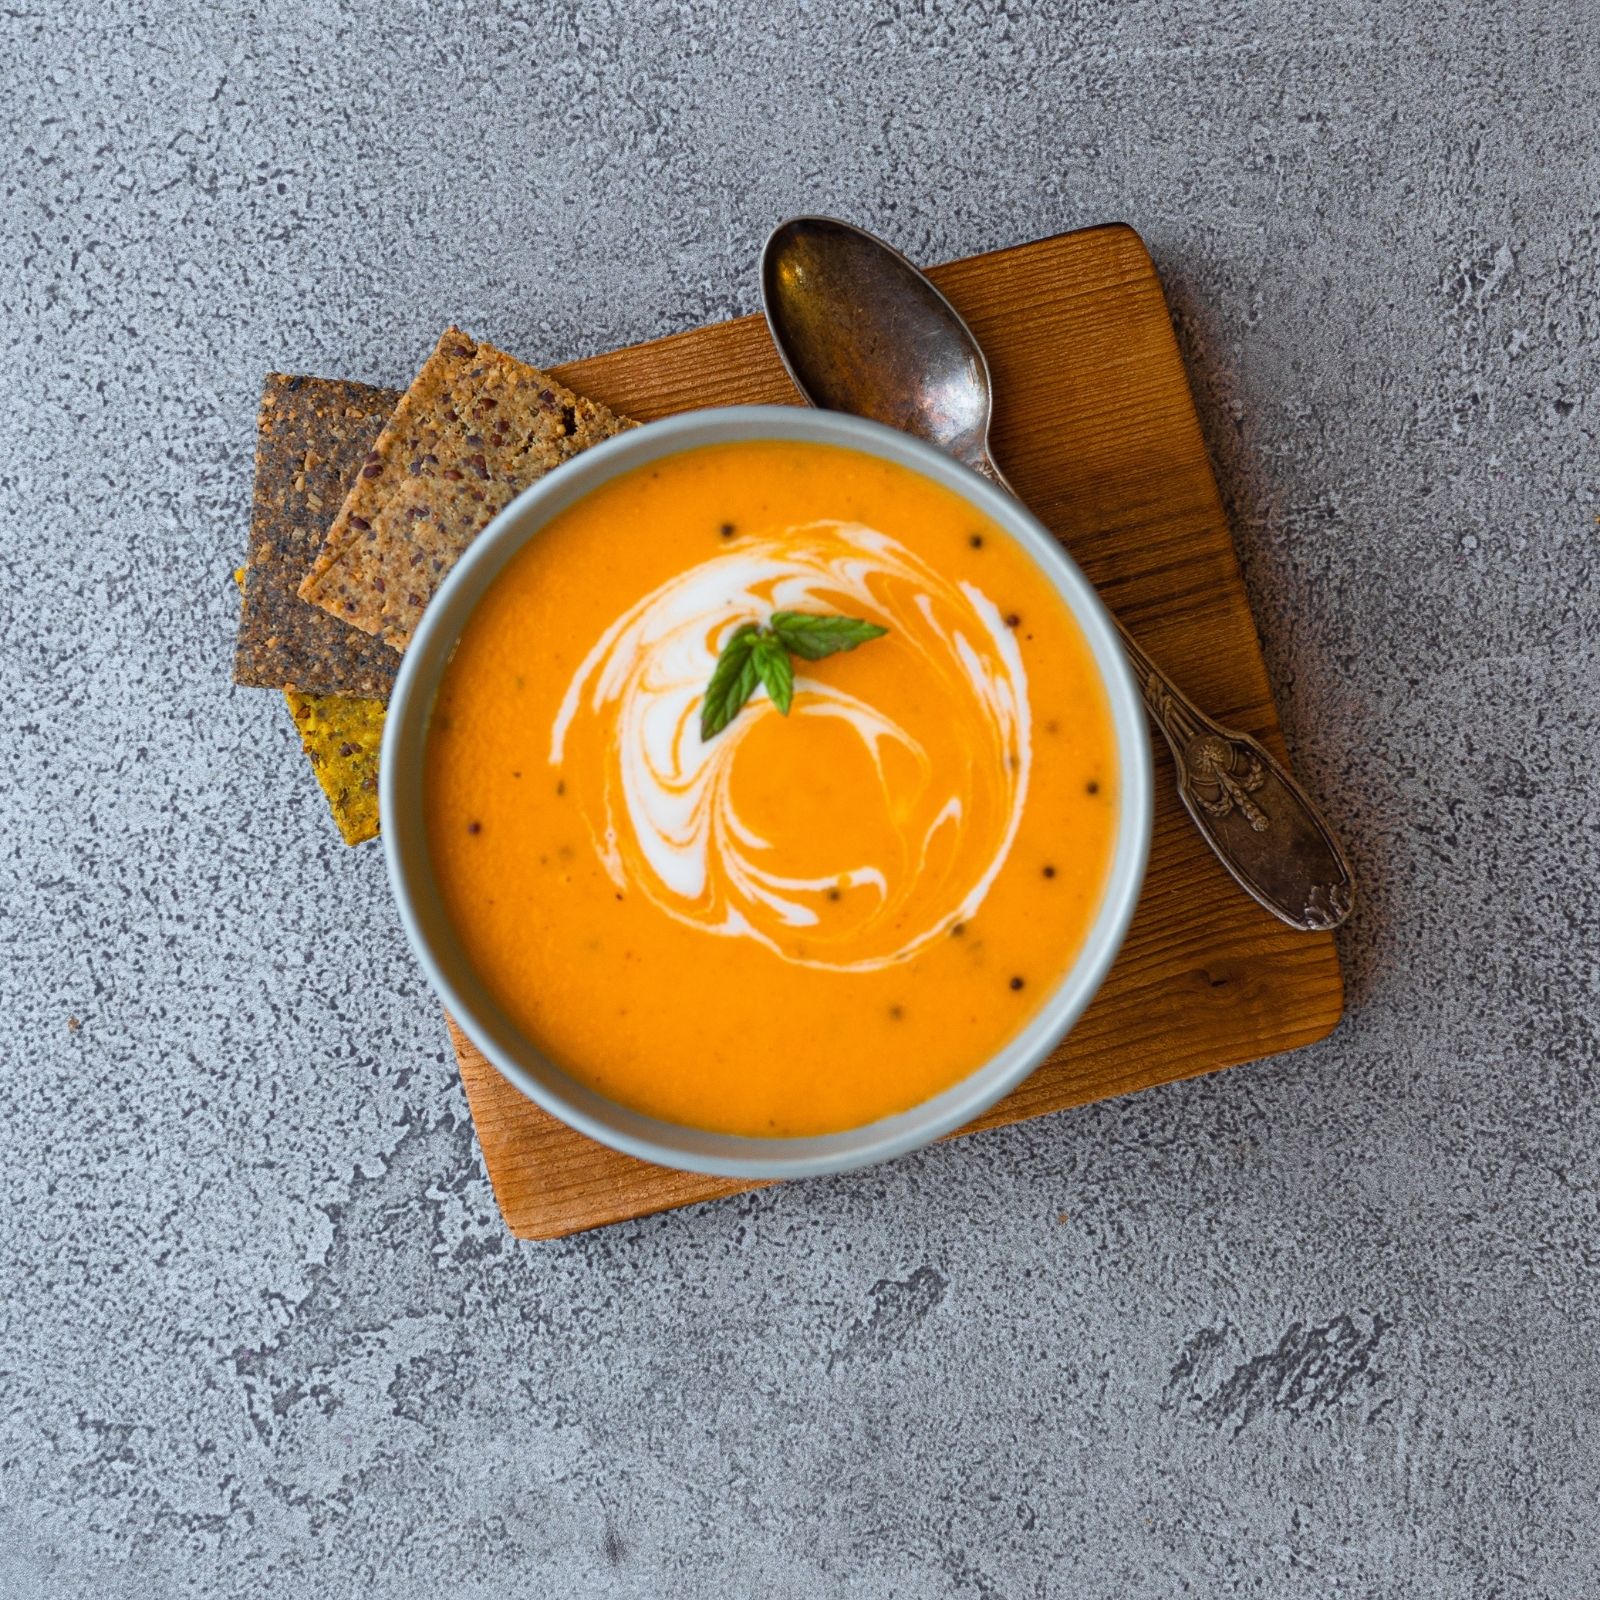 https://goodly.ca/wp-content/uploads/2021/10/tomato-coconut-soup.jpg